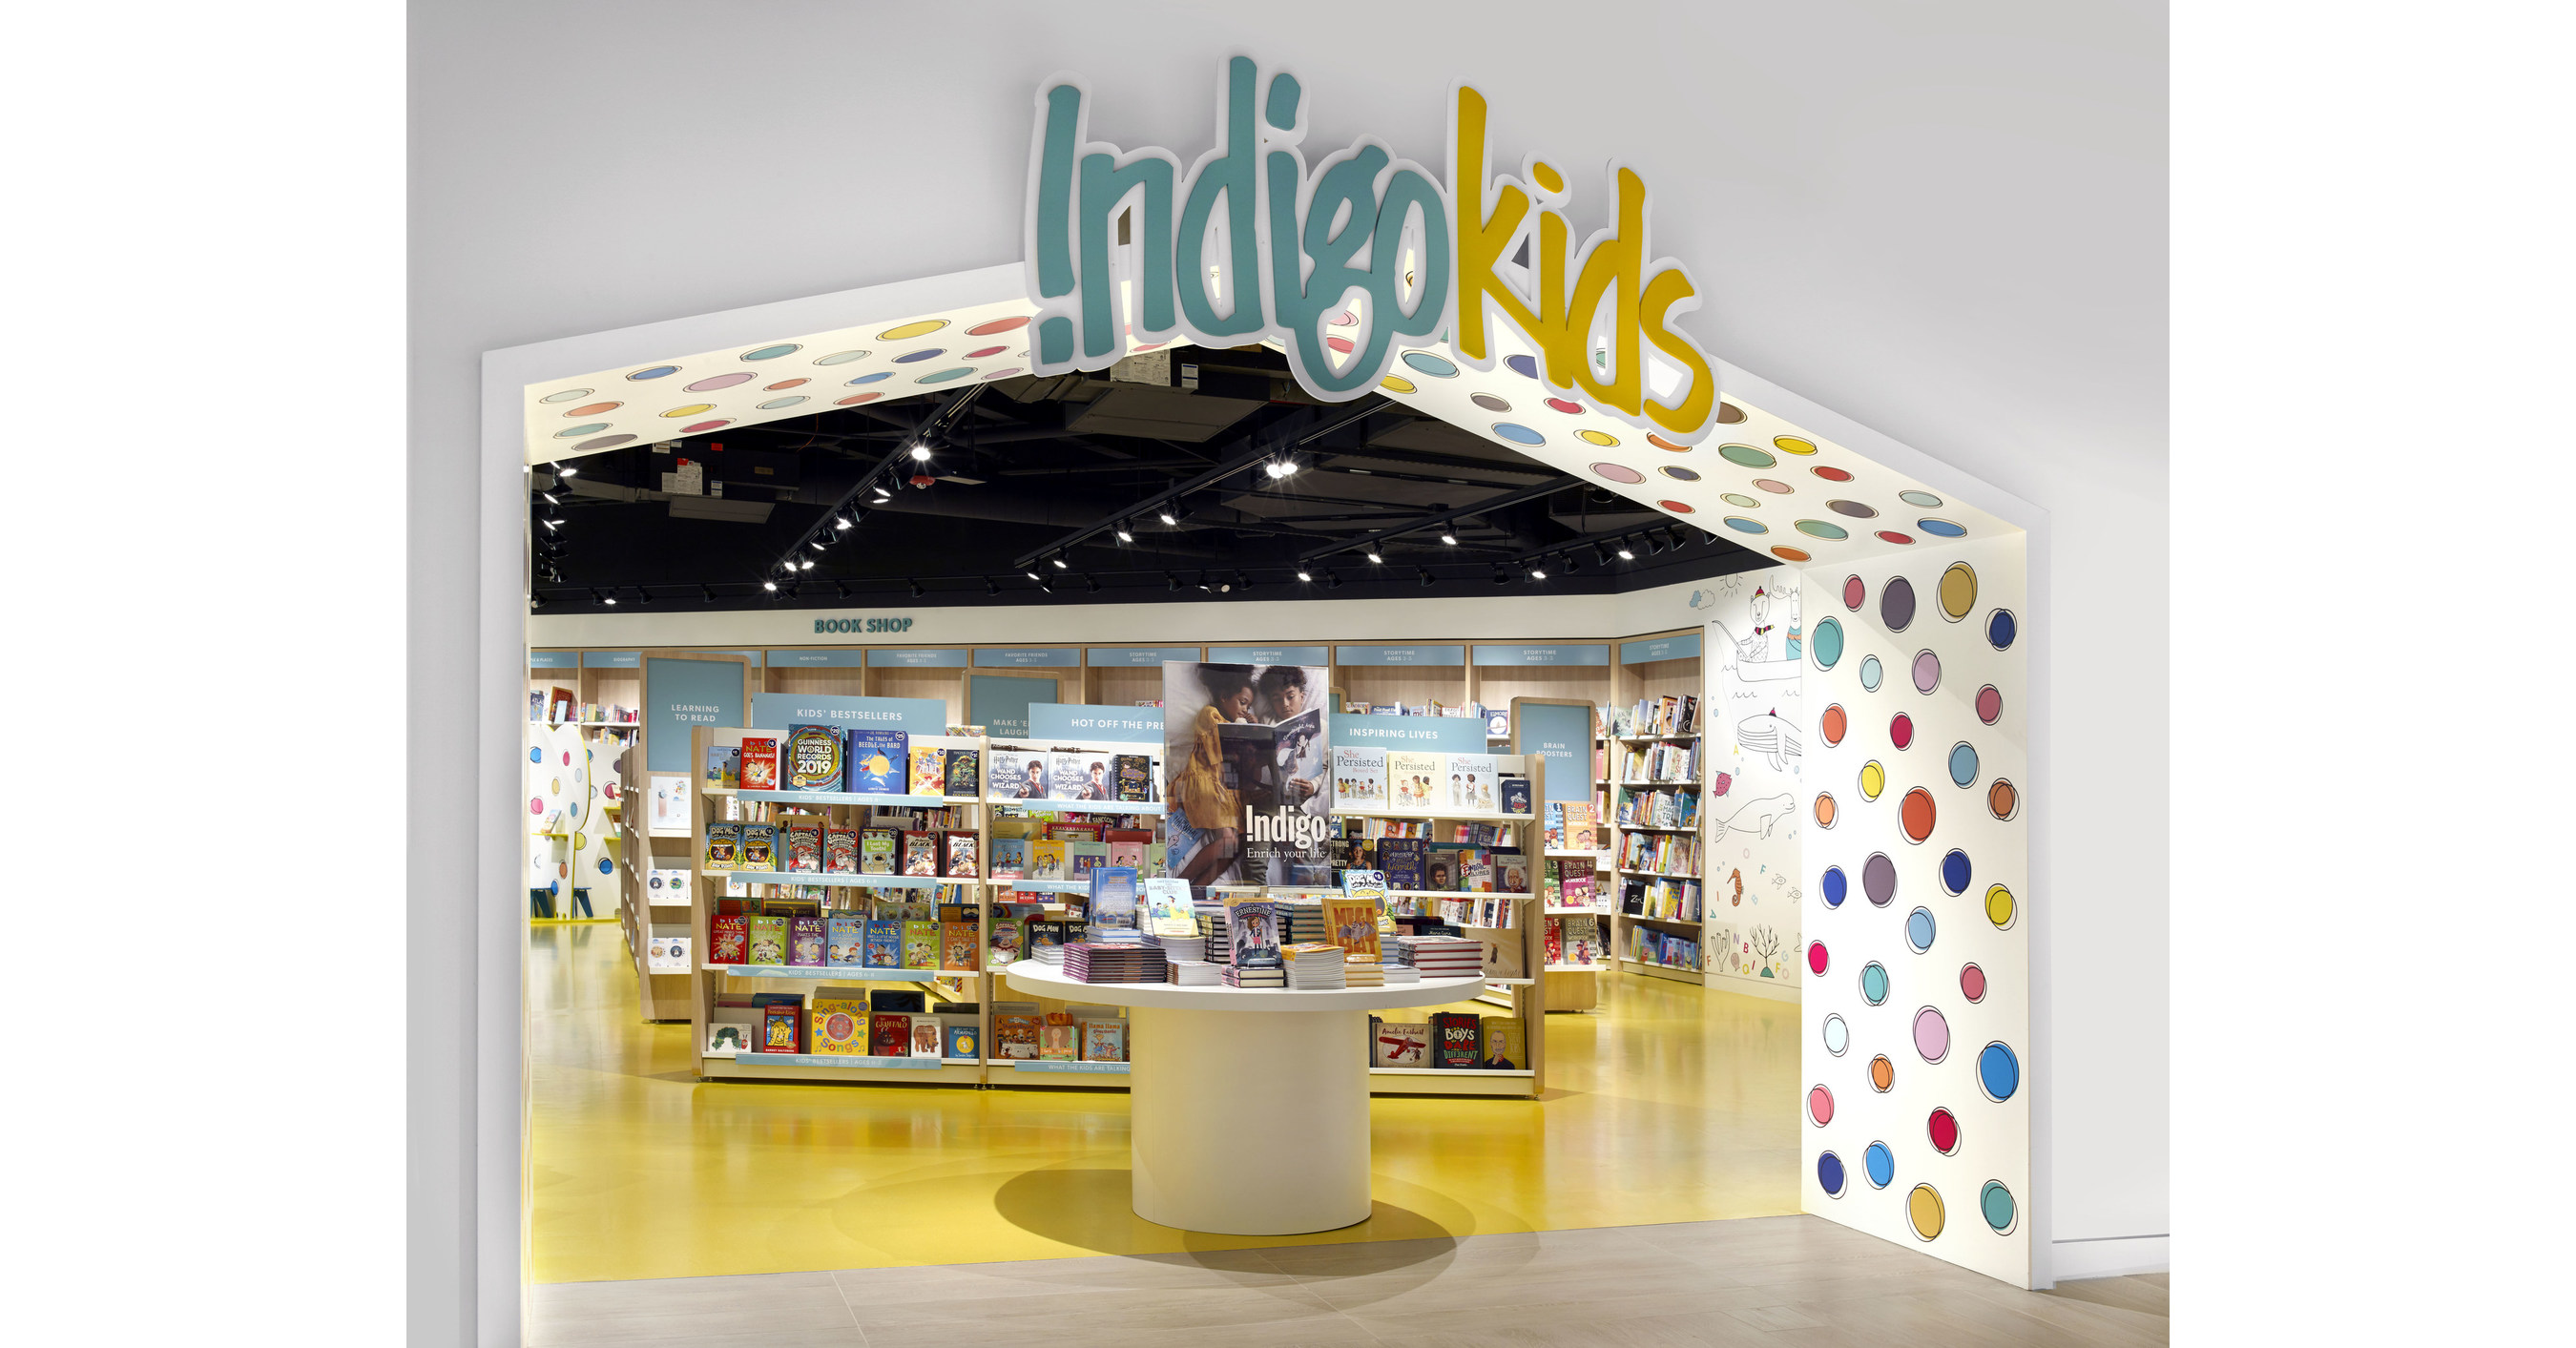 Canadian Retailer Indigo Opens First US Store at The Mall at Short